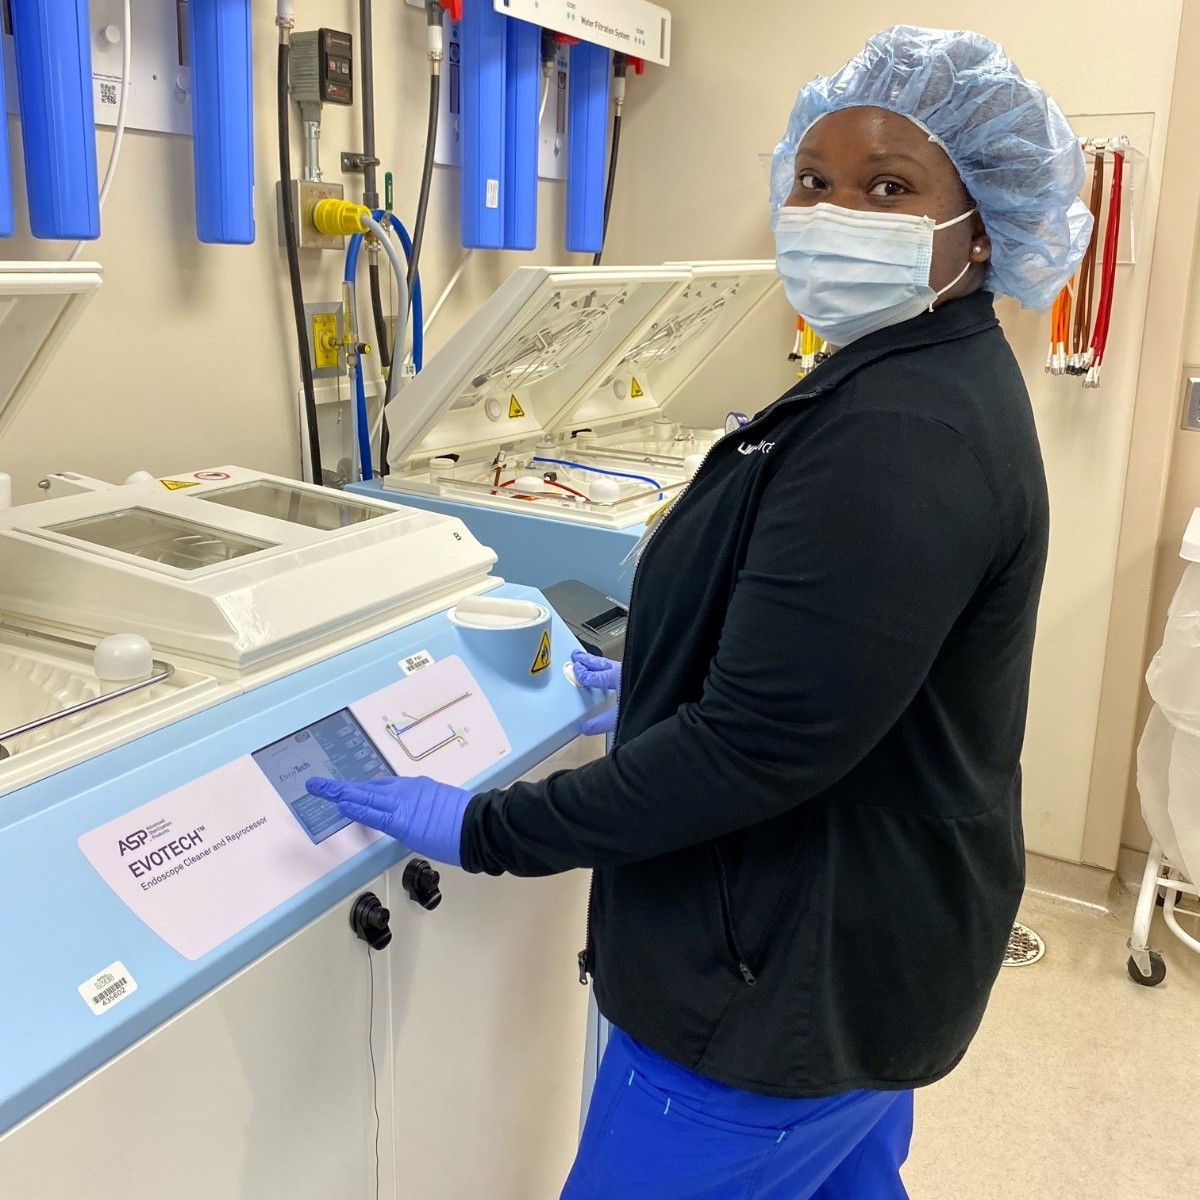 It's #SterileProcessing Week! We'd like to thank our UAB Medicine professionals whose ongoing due diligence leads to dependable equipment and process monitoring, allowing surgeries to be performed without delay. Thank you for all you do! 👏